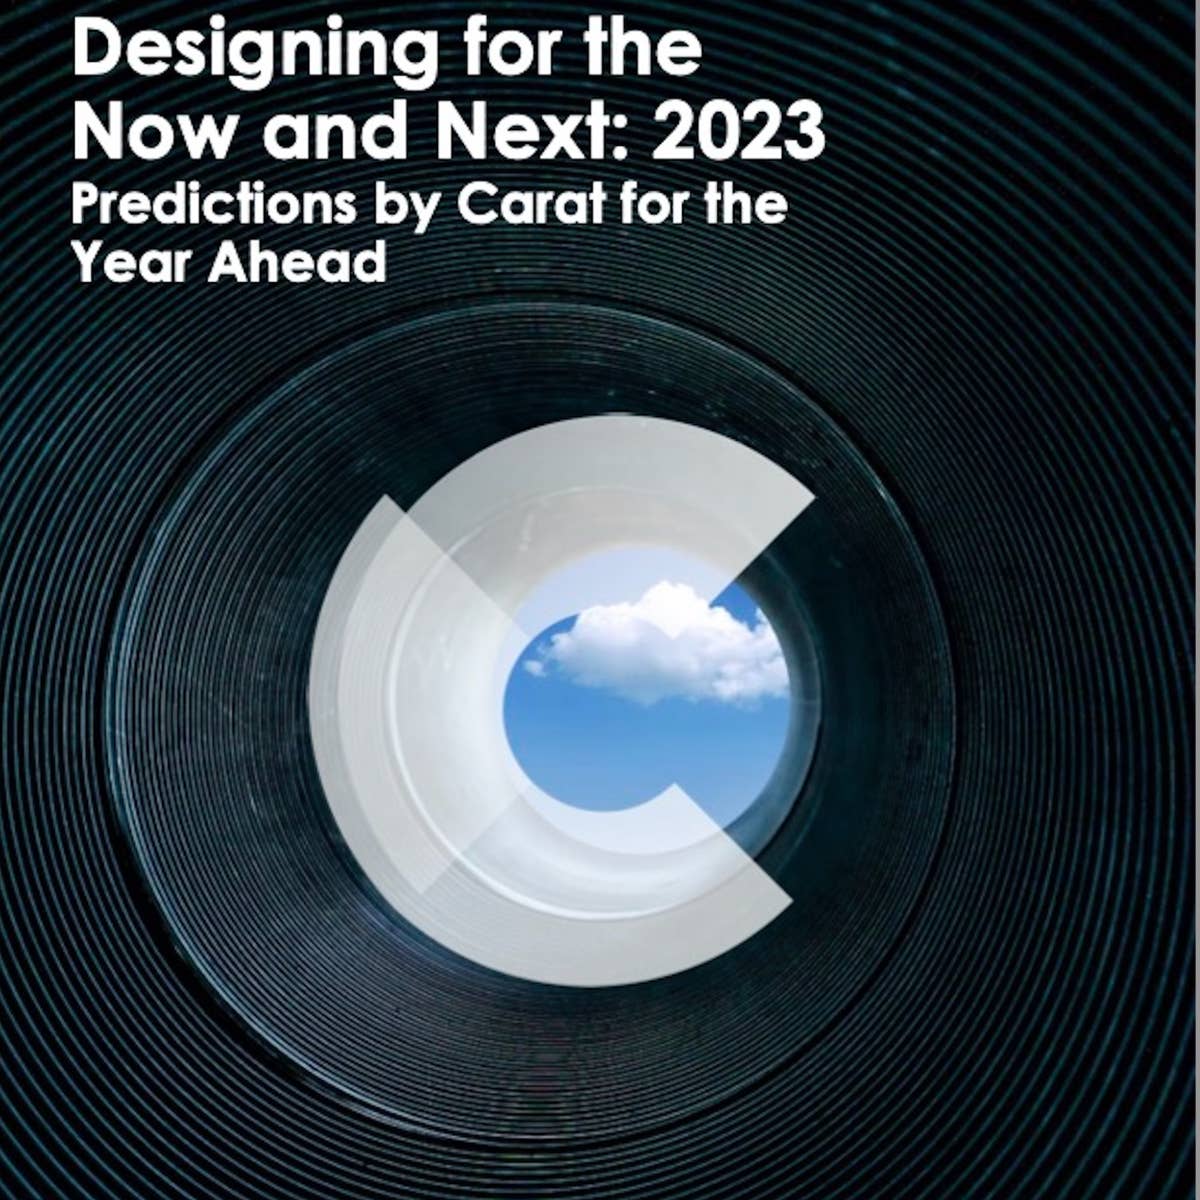 Designing for the Now and Next, Predictions by Carat for the Year Ahead 